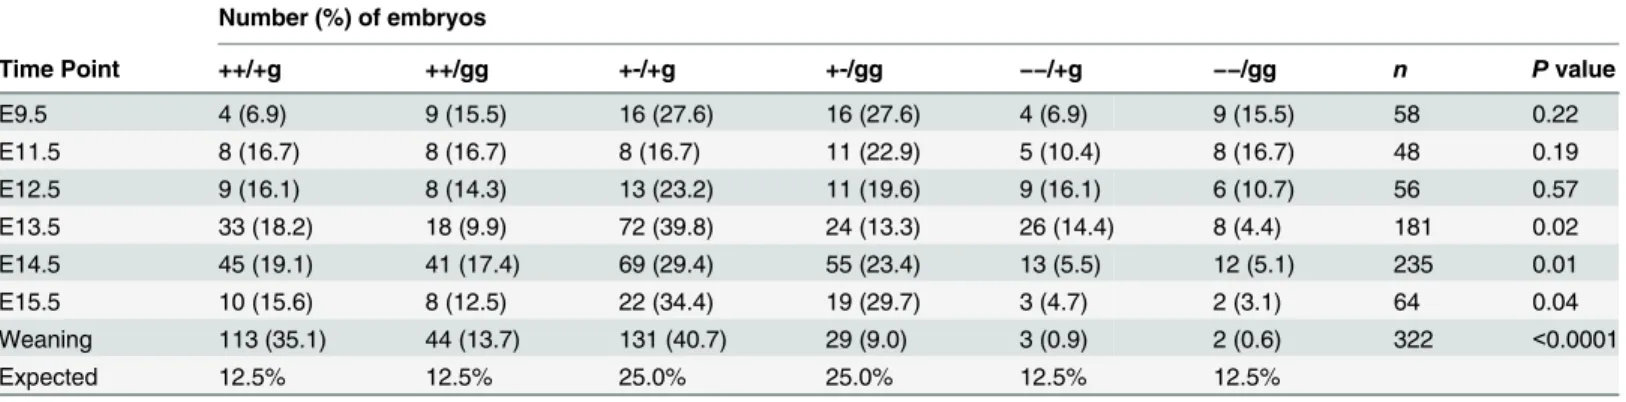 Table 3. Genotypes of offspring from timed matings of Psip1/Hdgfrp2 +-/+g and +-/gg animals.